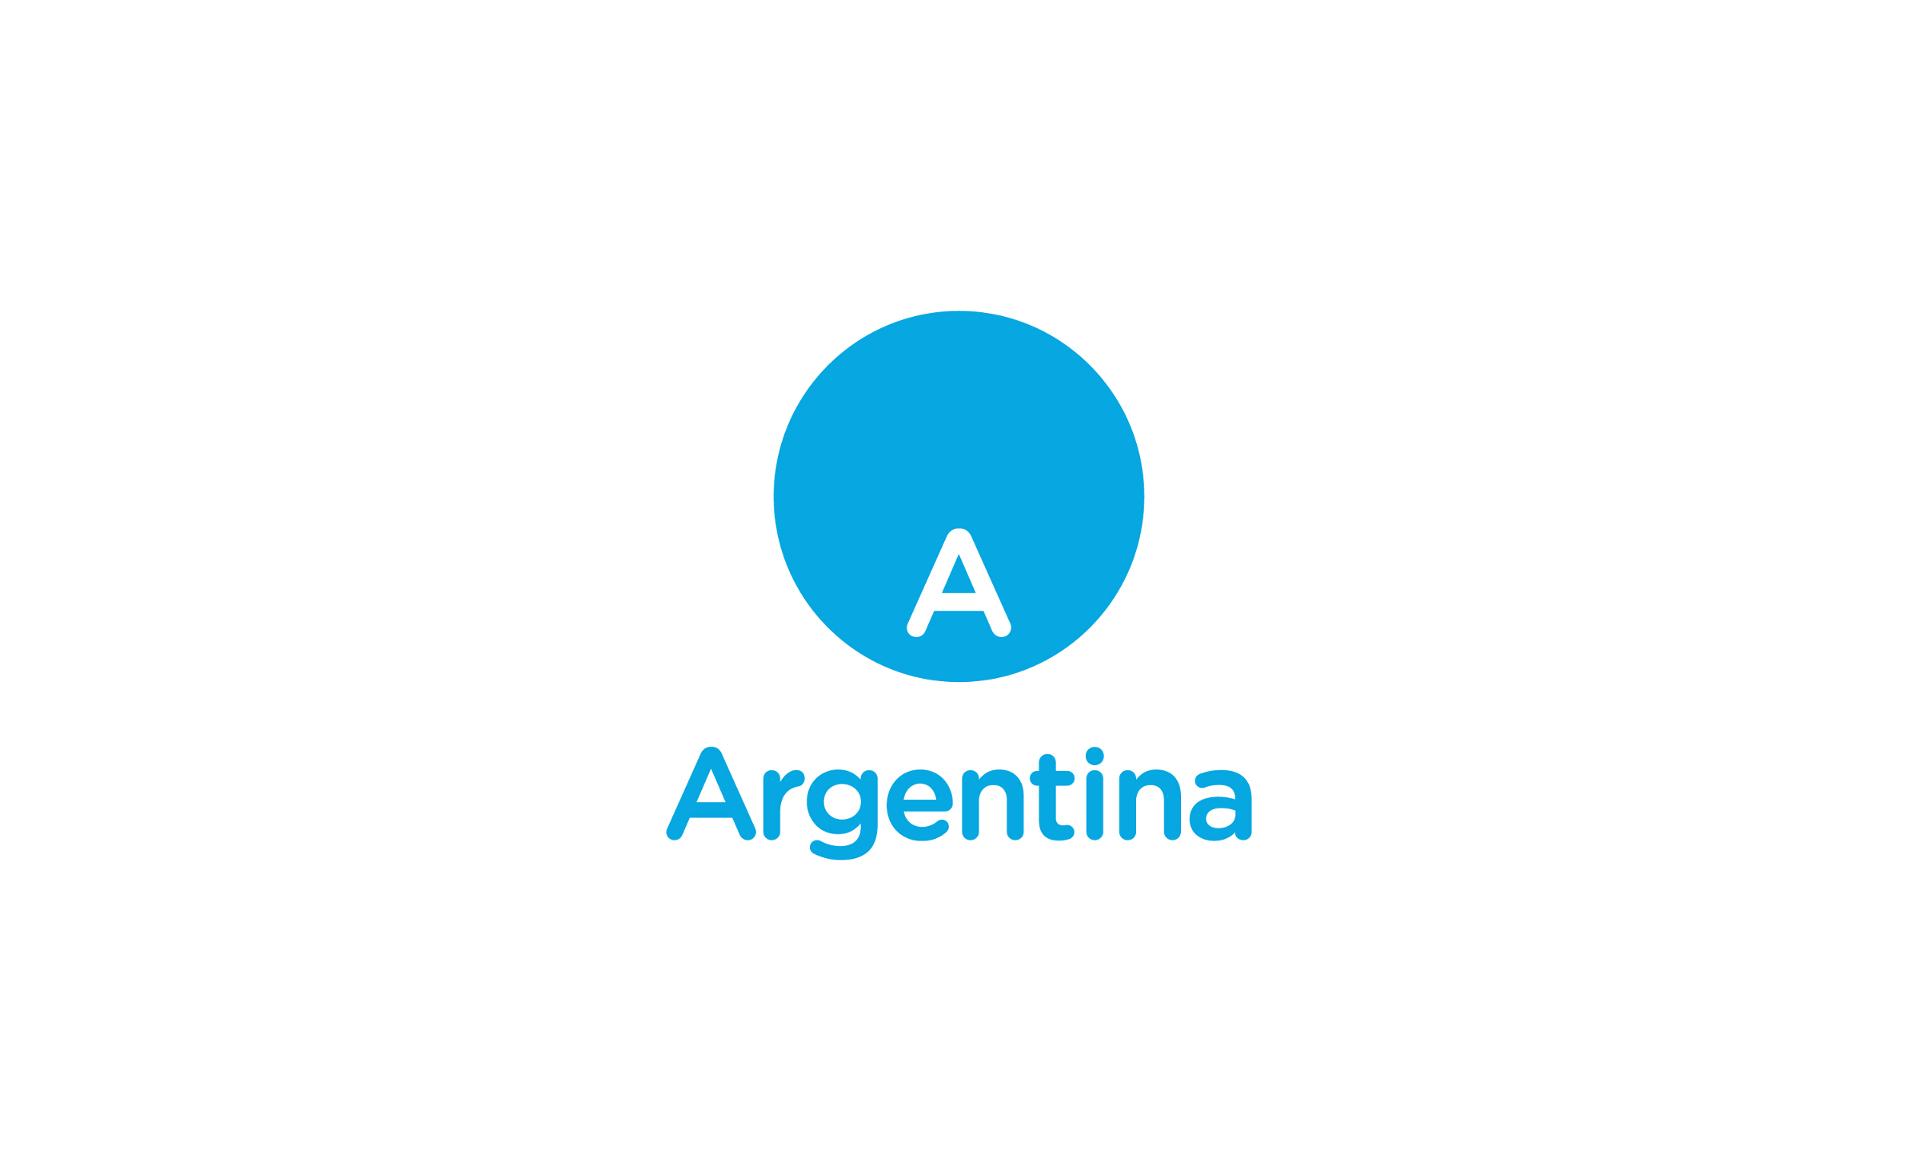 Modern Country Logo - Argentina launches new country branding with a modern logo